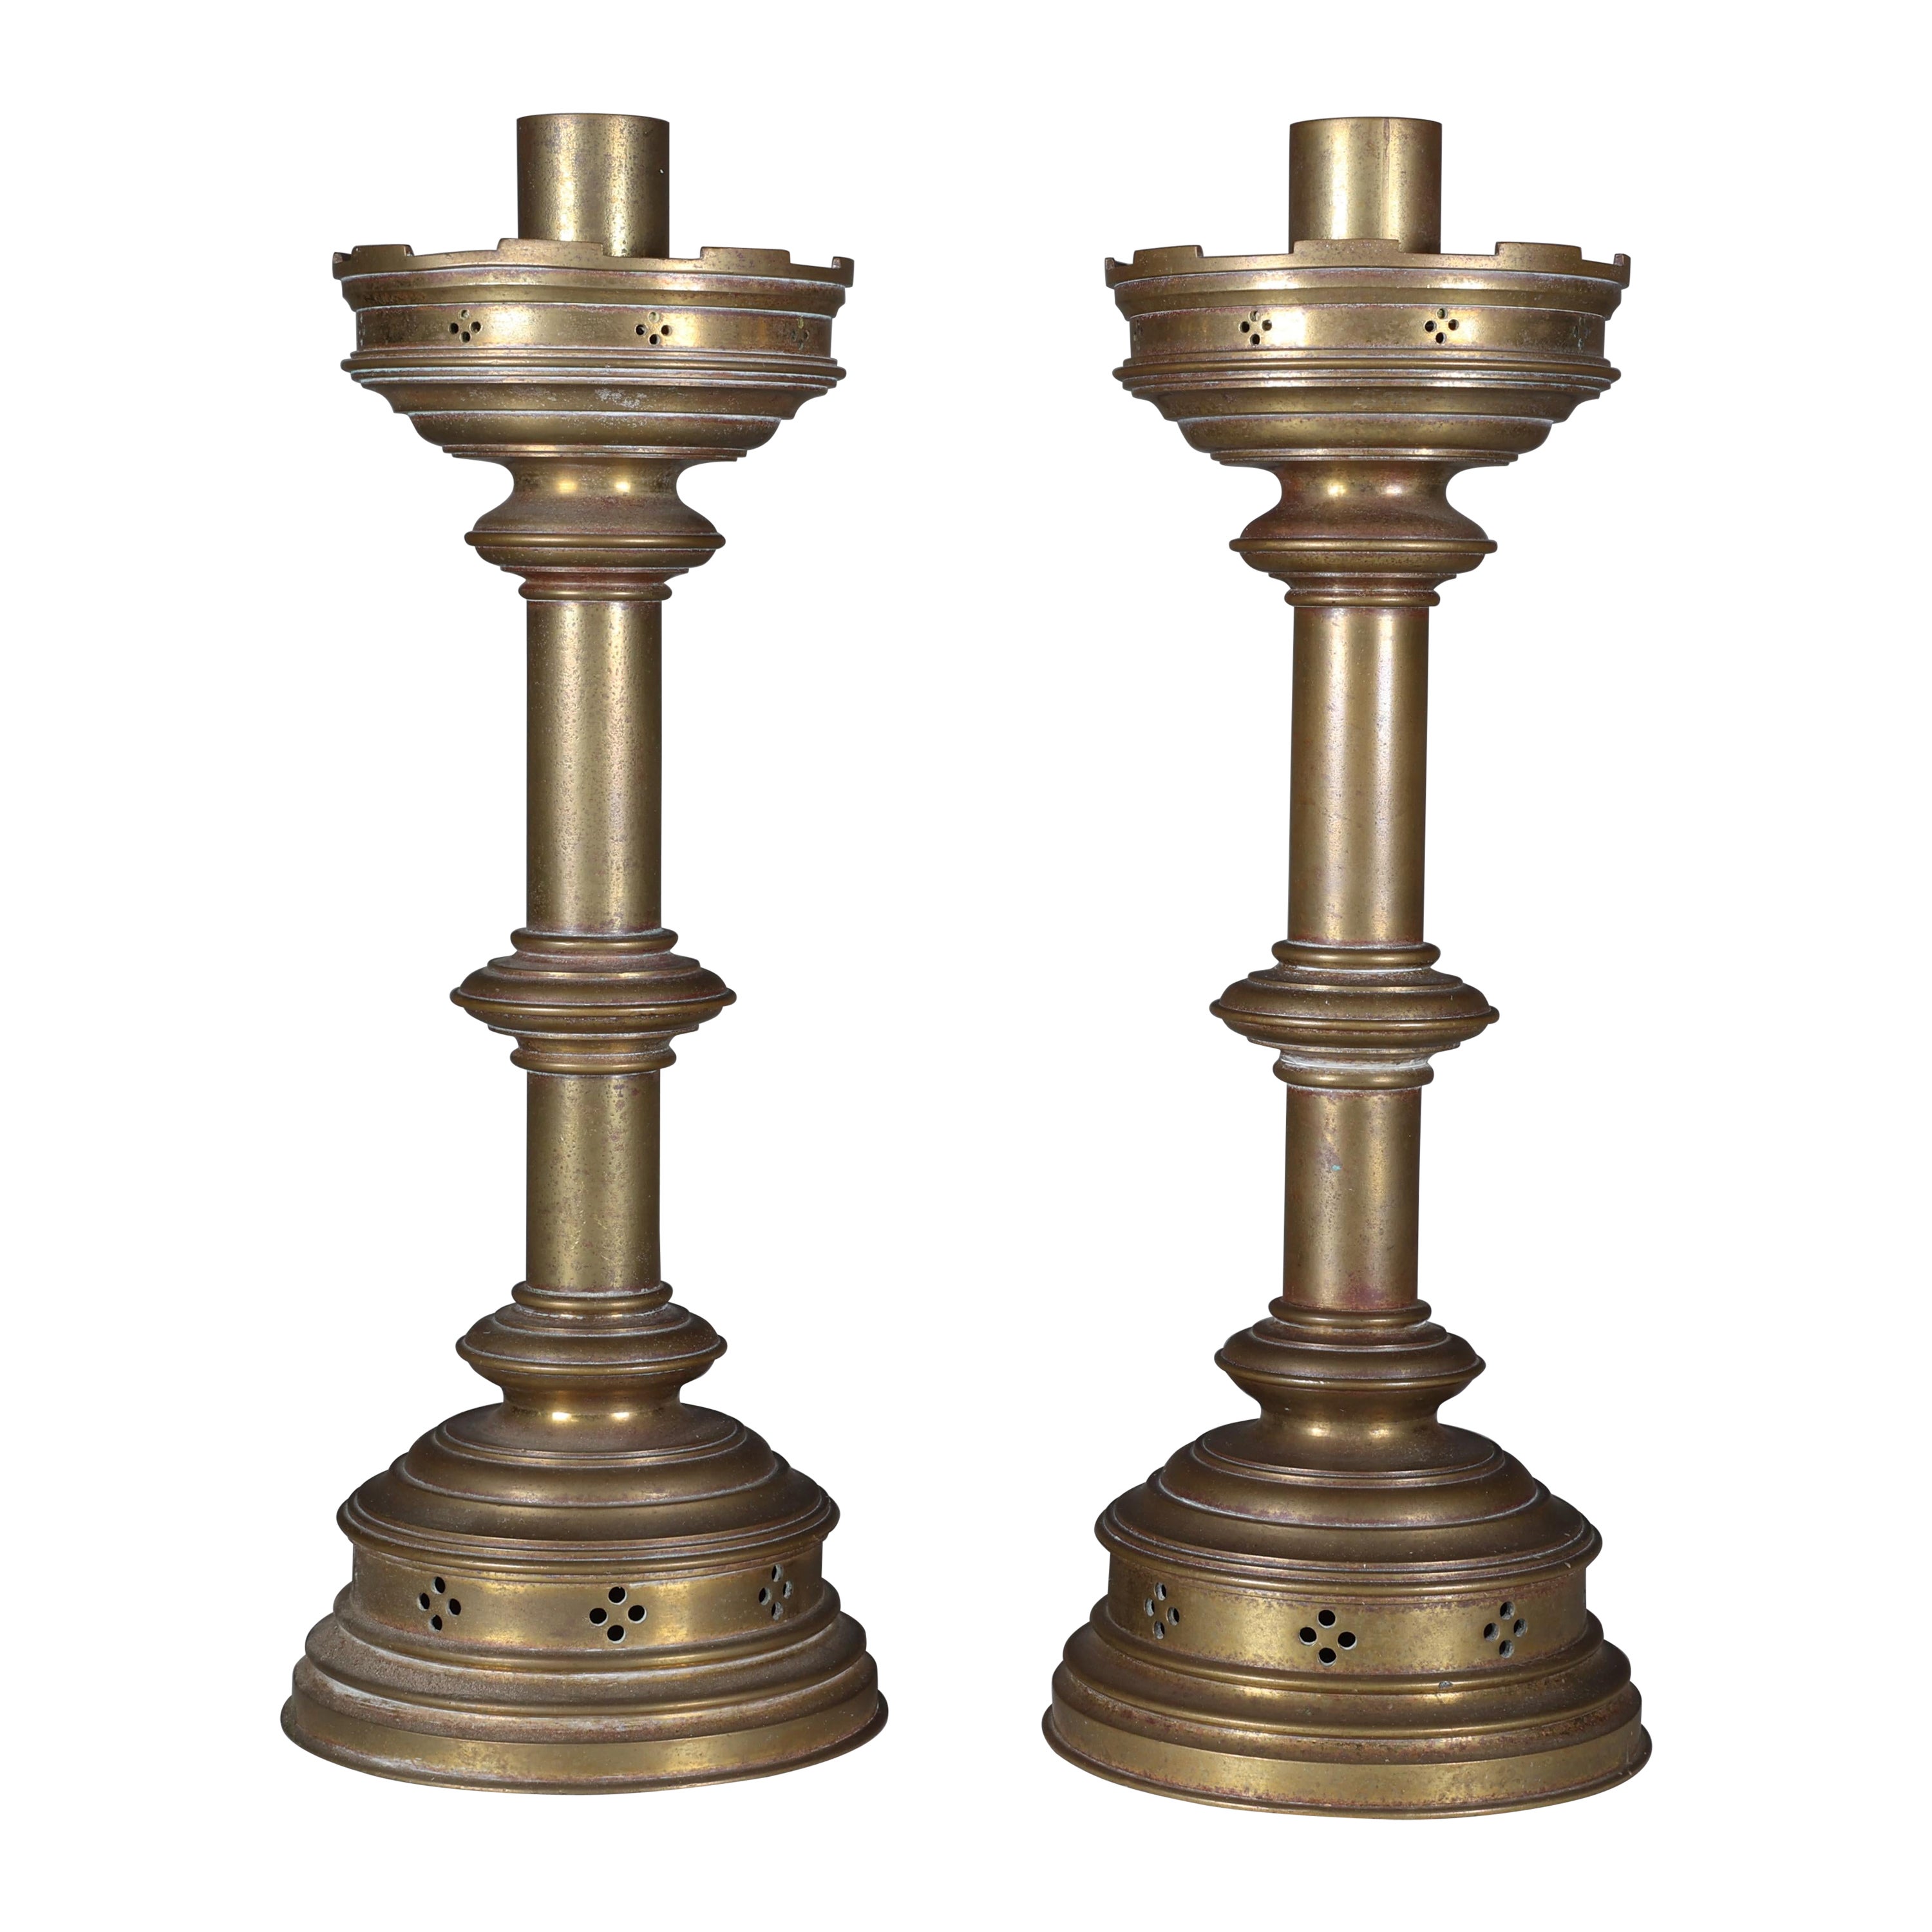 Jones and Willis. A pair of Gothic Revival heavy brass castellated candlesticks 